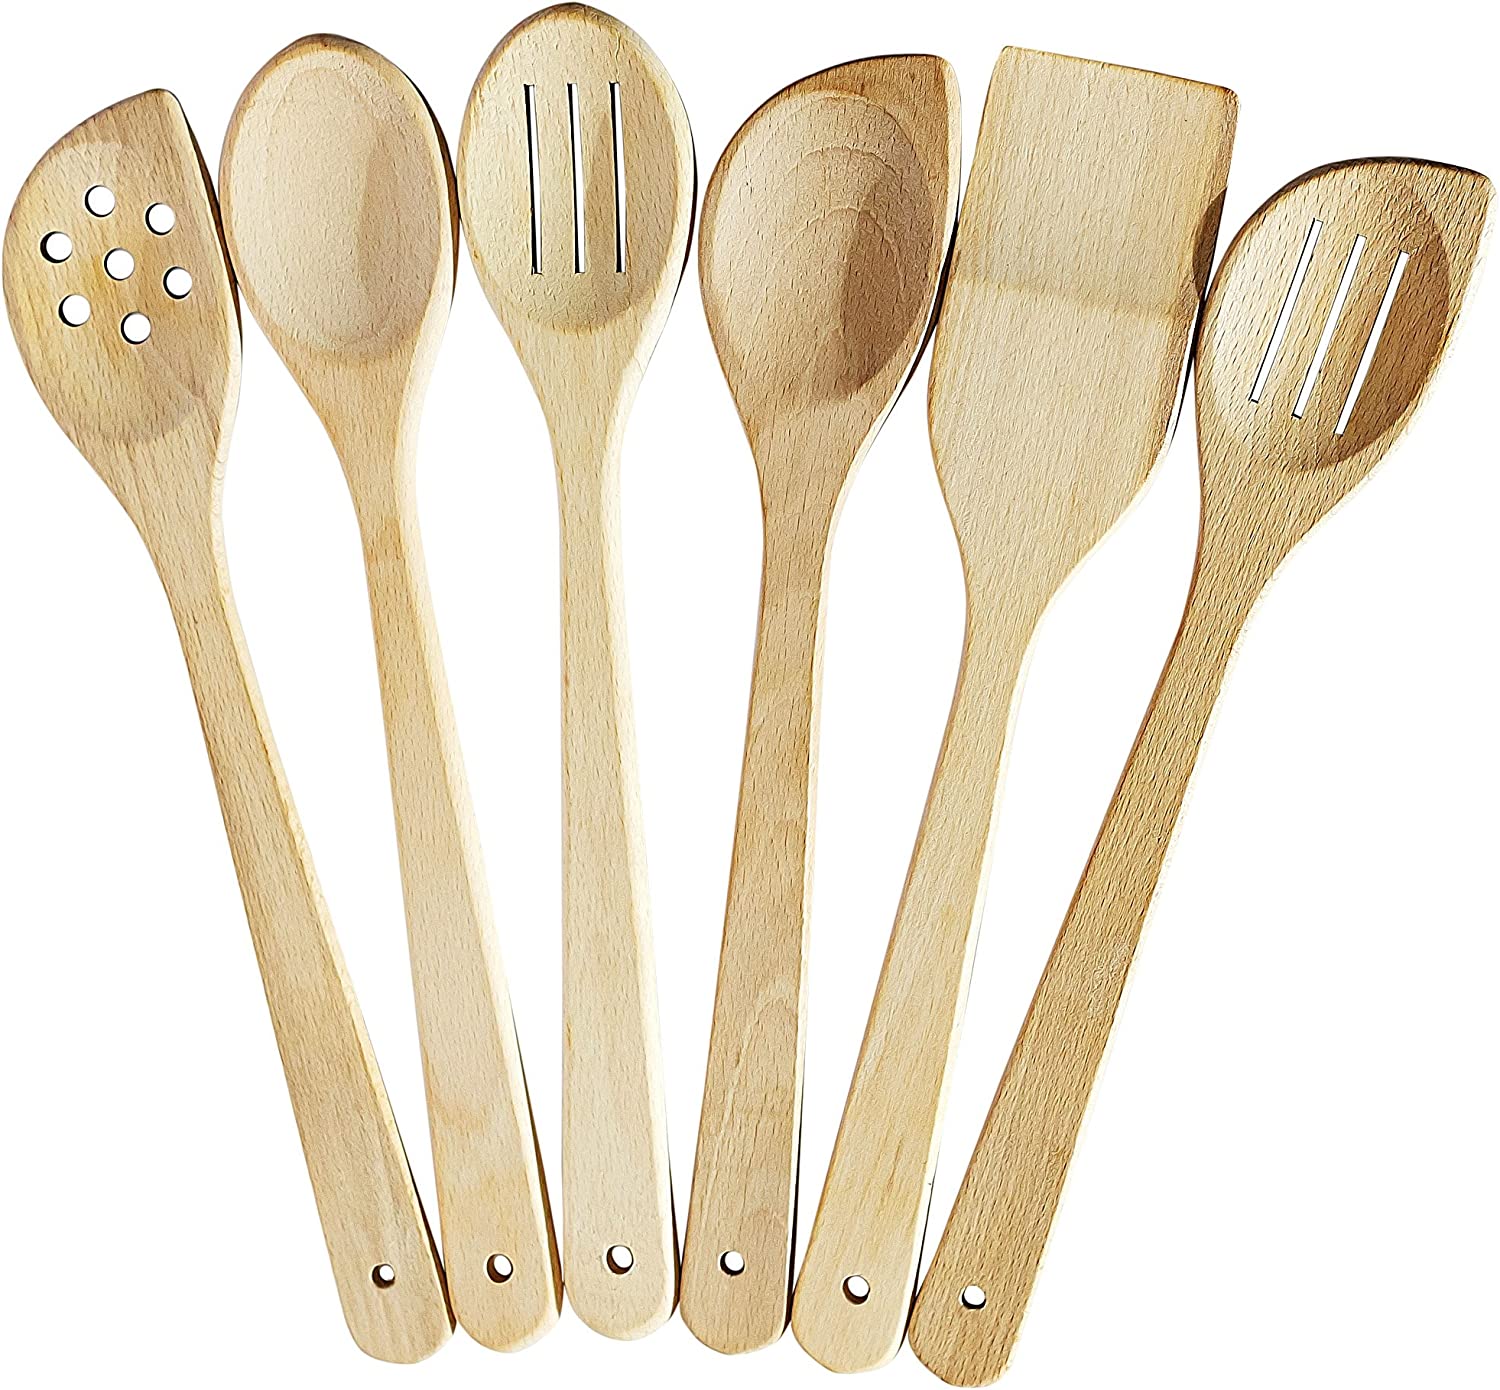 Non Toxic Wooden Cooking Utensils 10